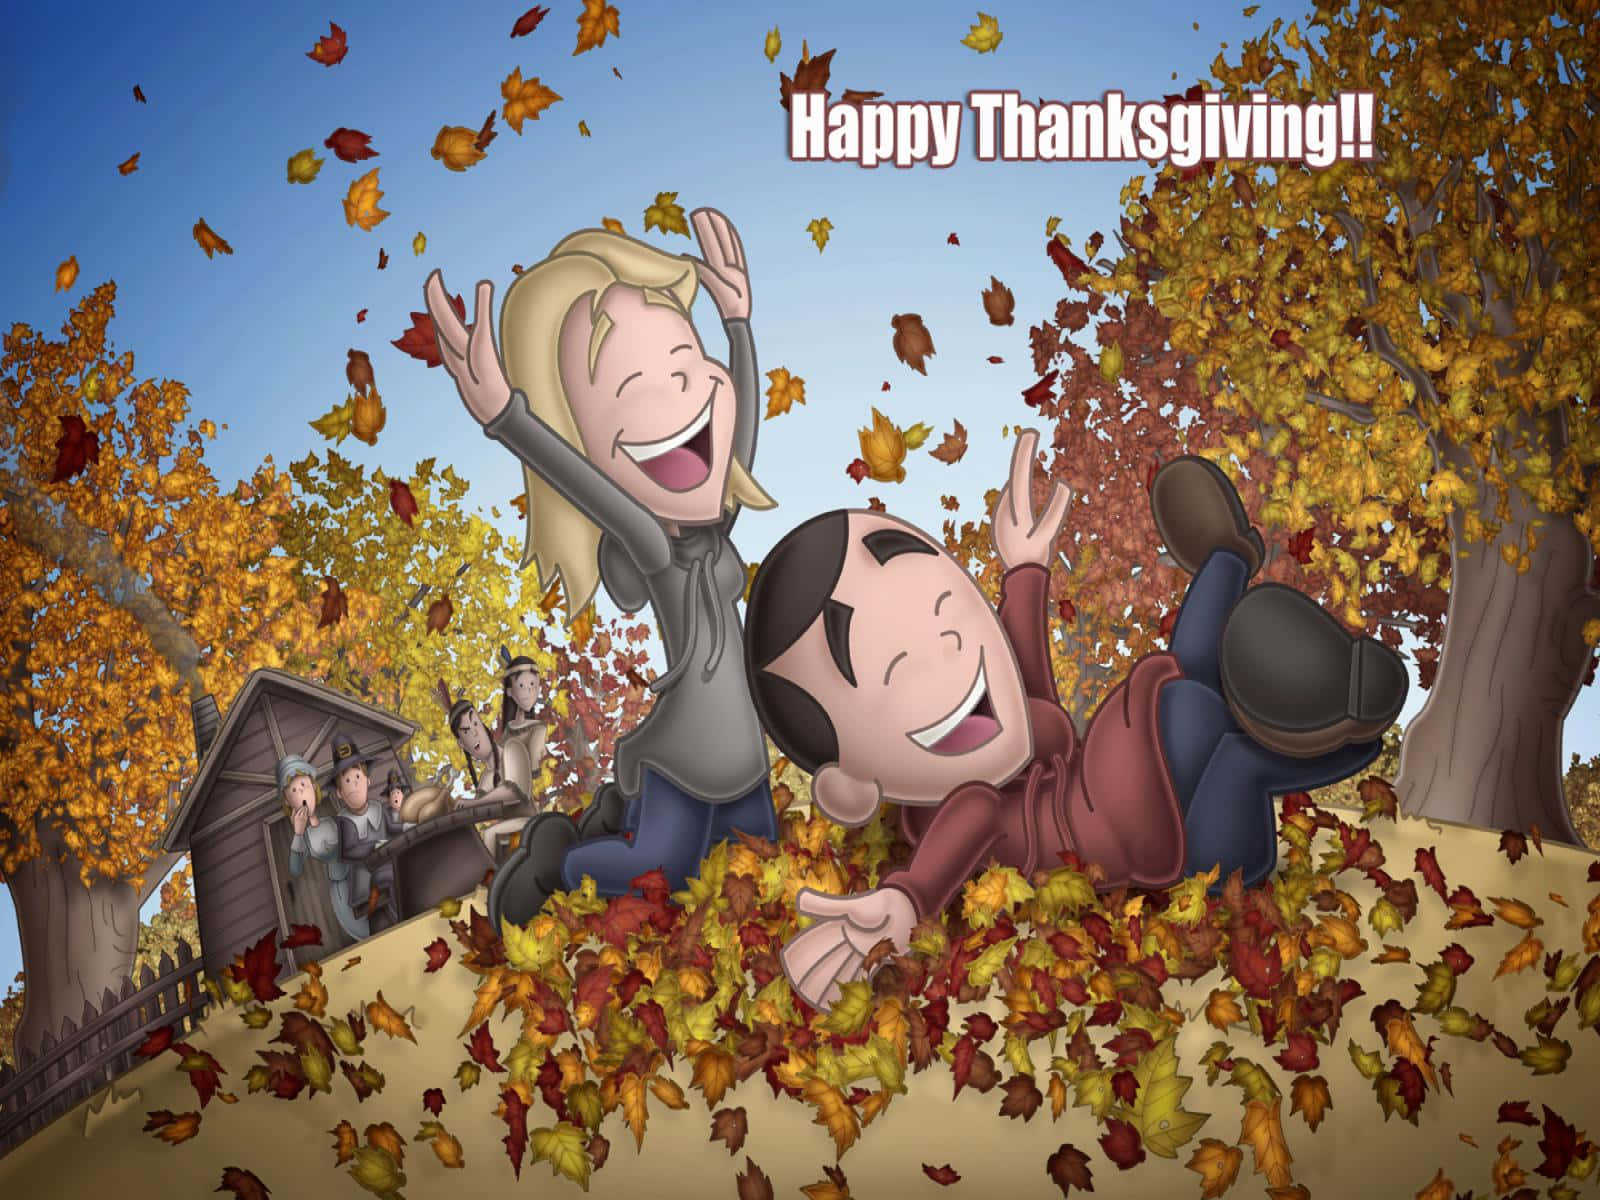 ' Give Thanks For Thanksgiving And Laugh Out Loud!